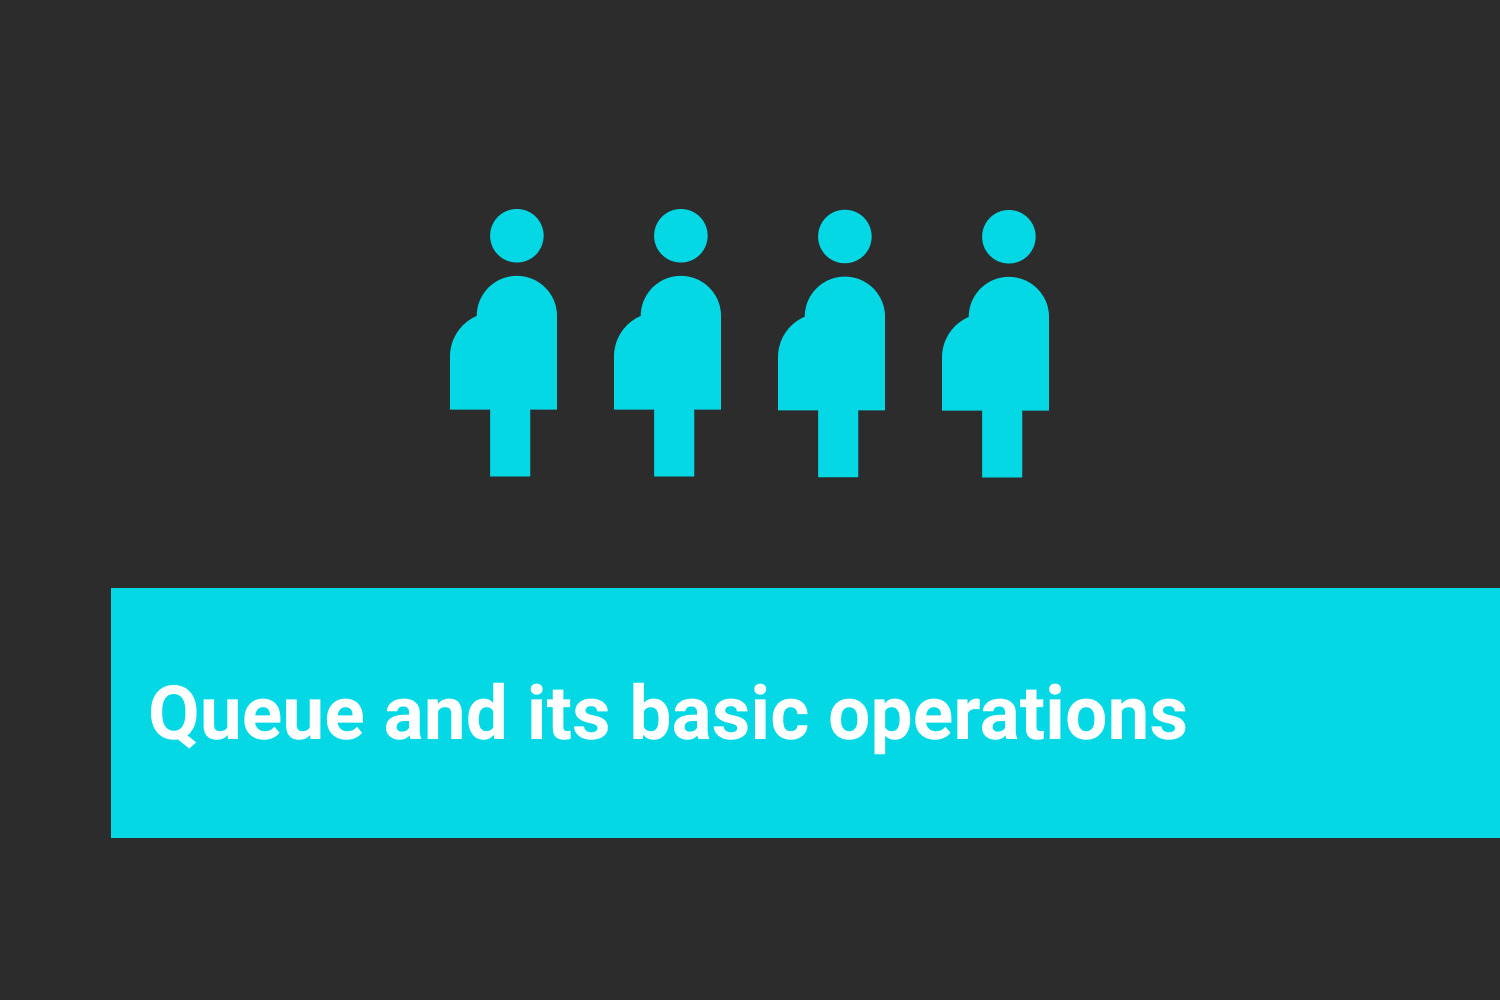 Queue and its basic operations